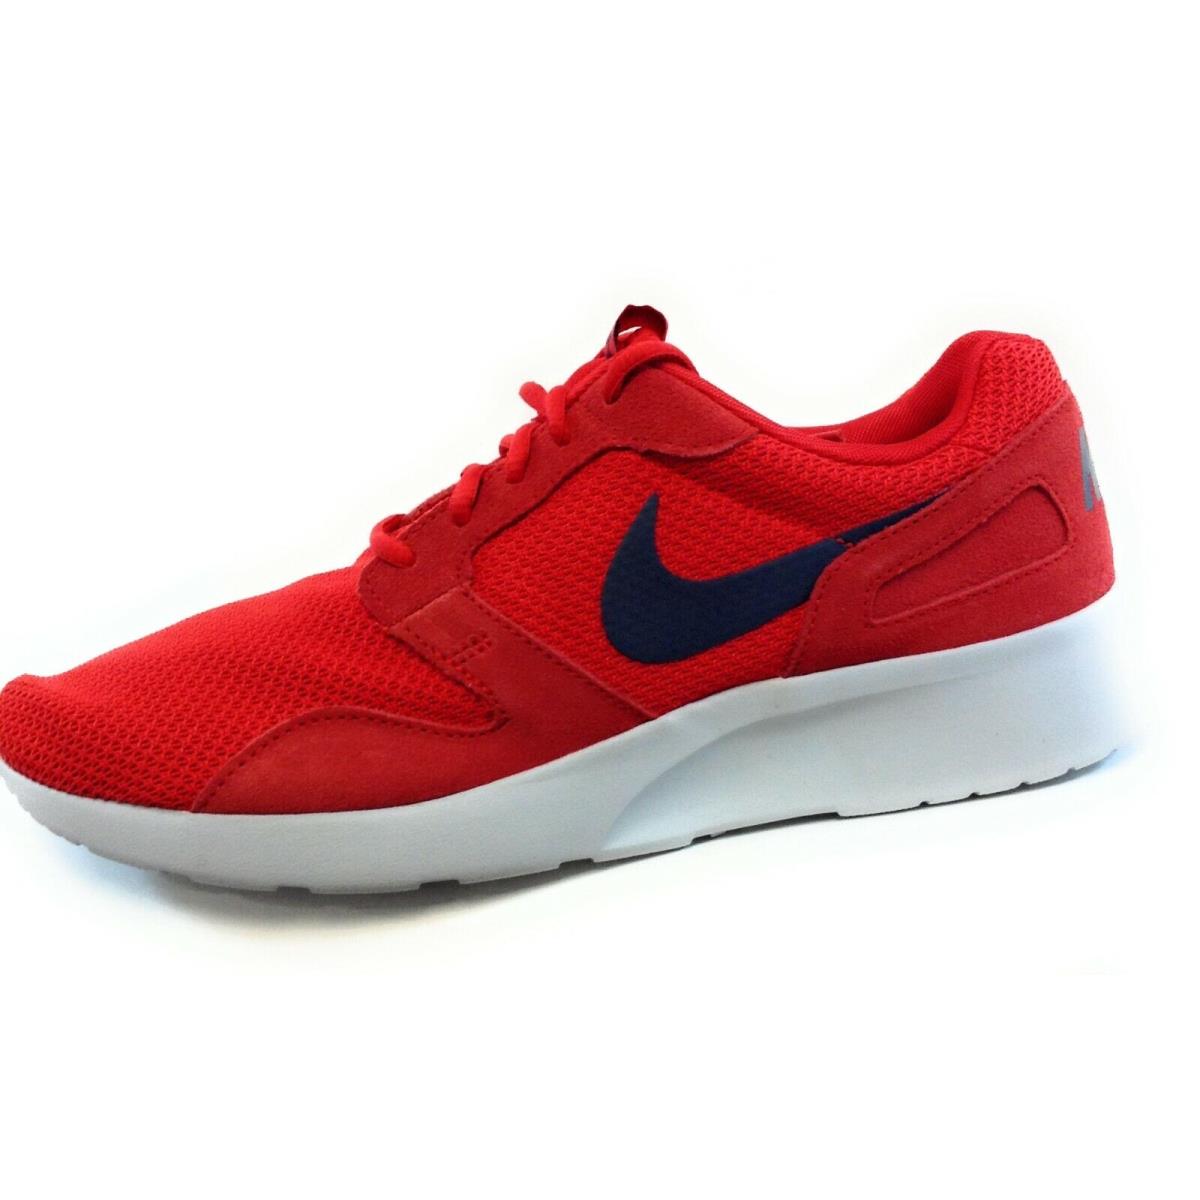 Nike shoes  - Red , Chilling Red Manufacturer 0